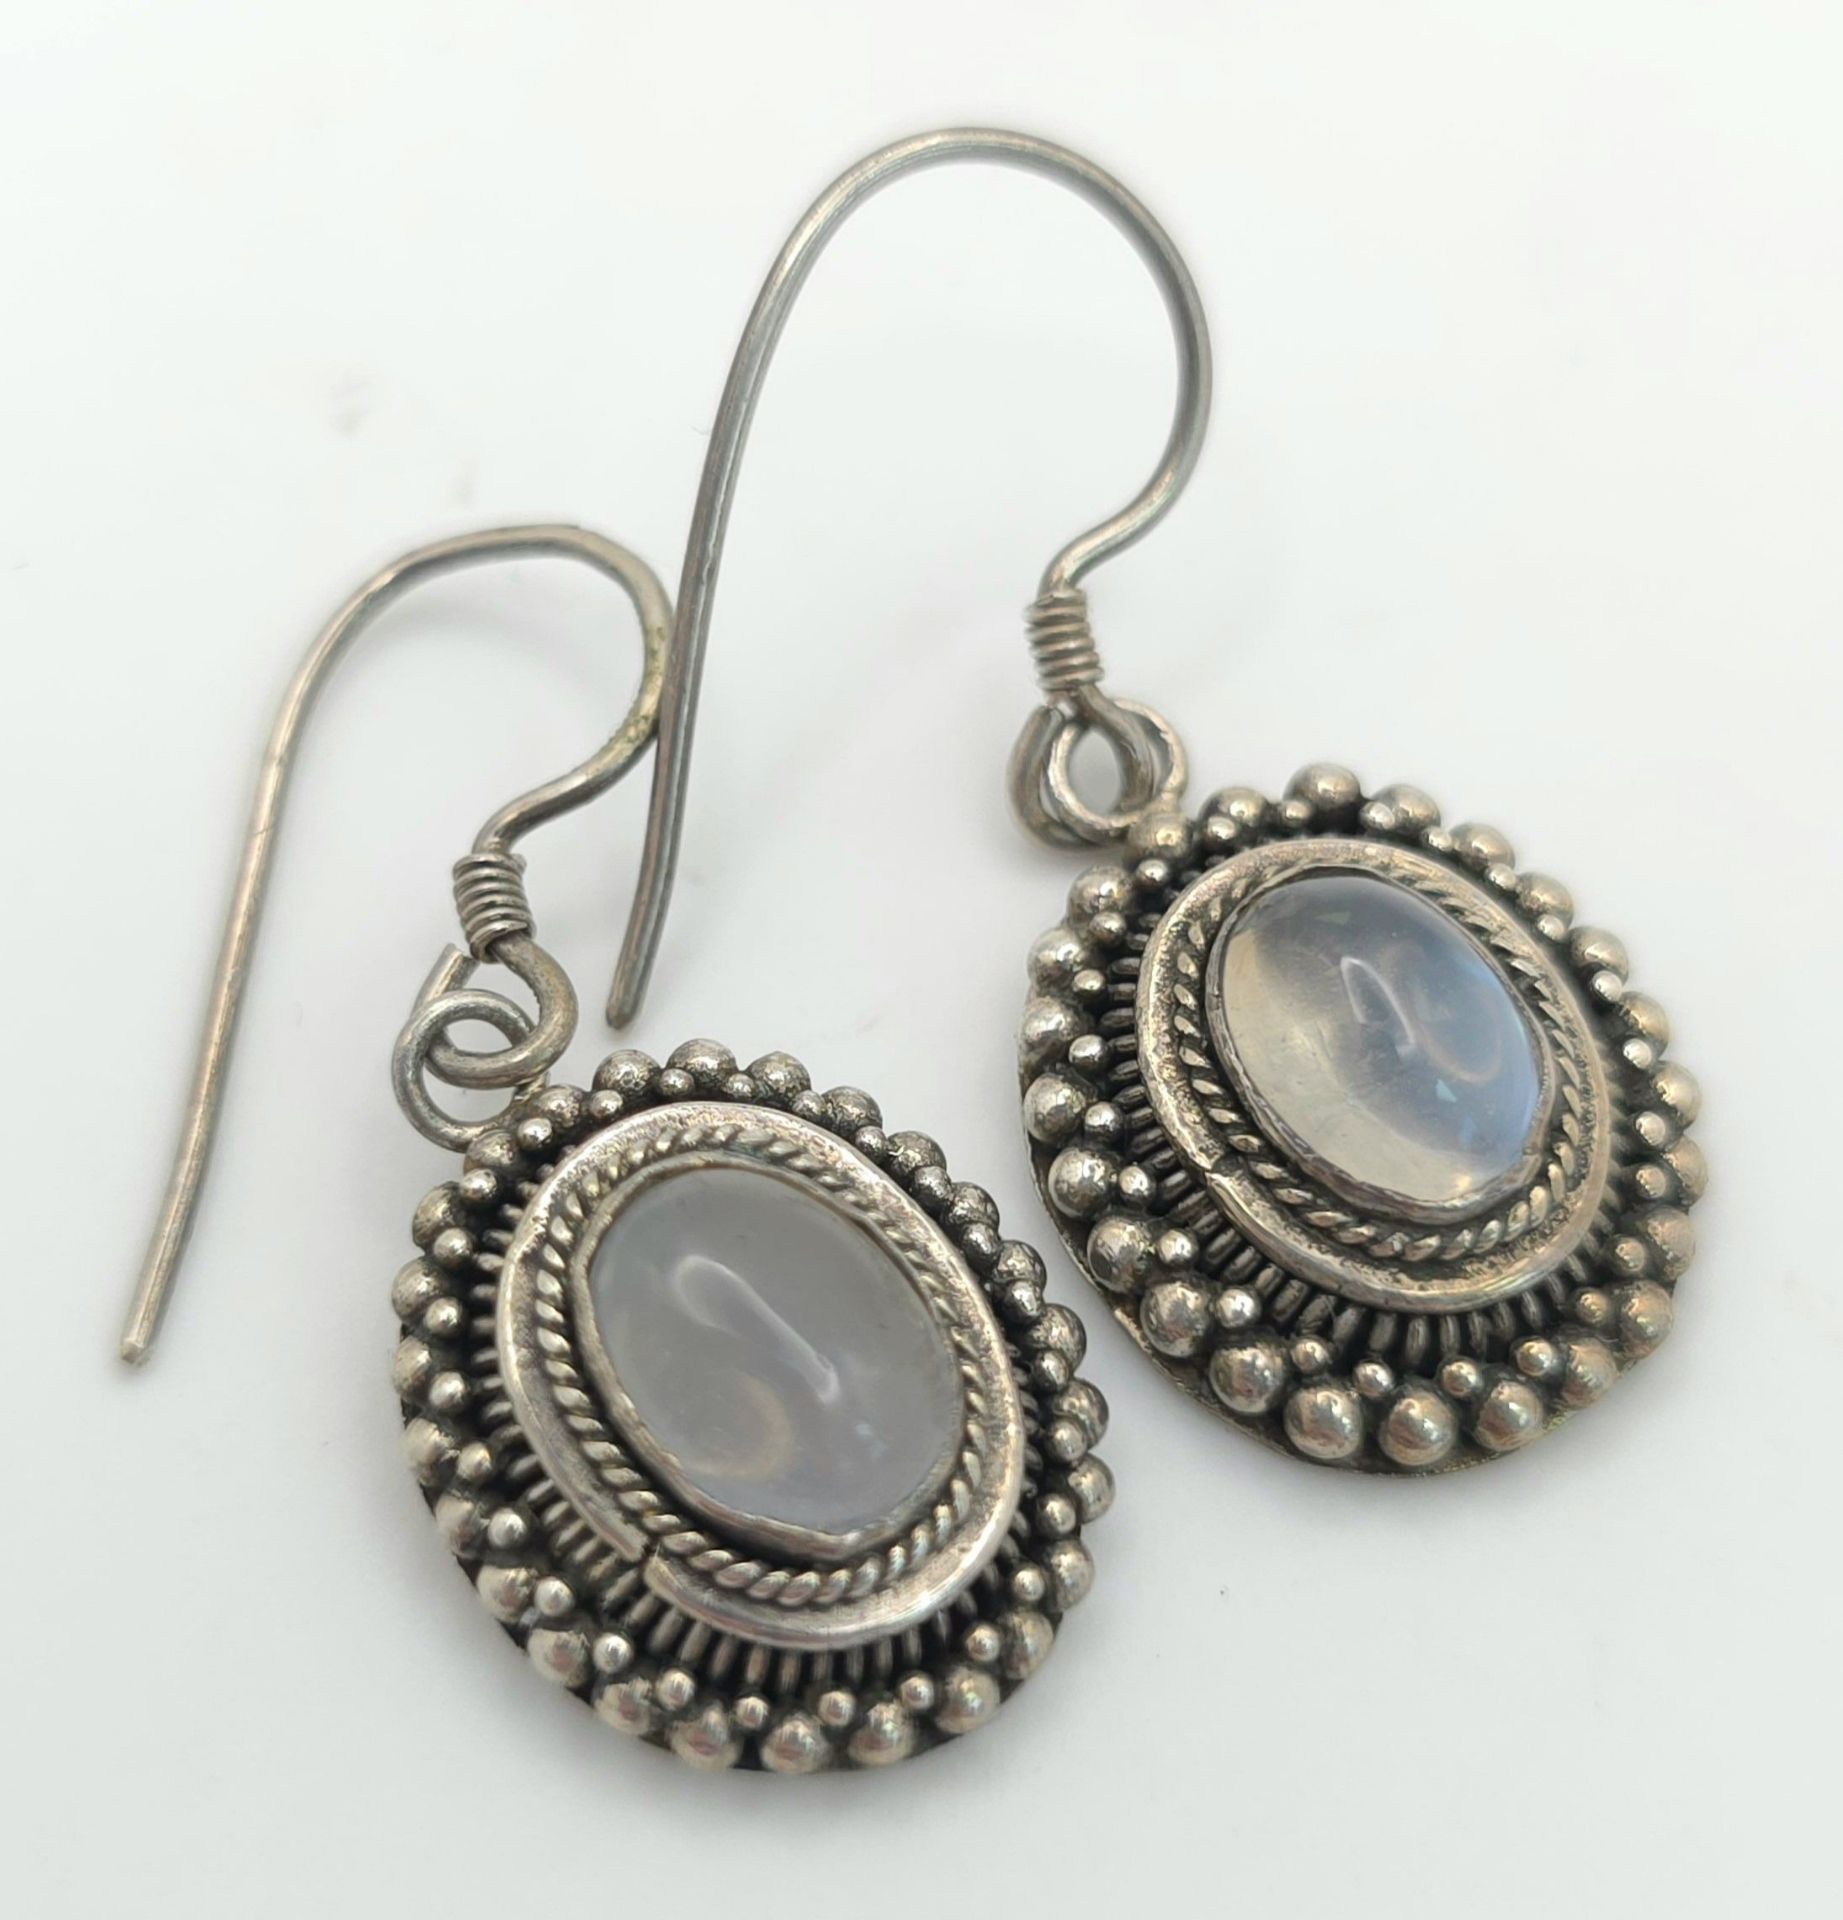 A Pair of Vintage Sterling Silver Moonstone Cabochon Earrings. 3.2cm Drop. Set with 8mm Oval Cut